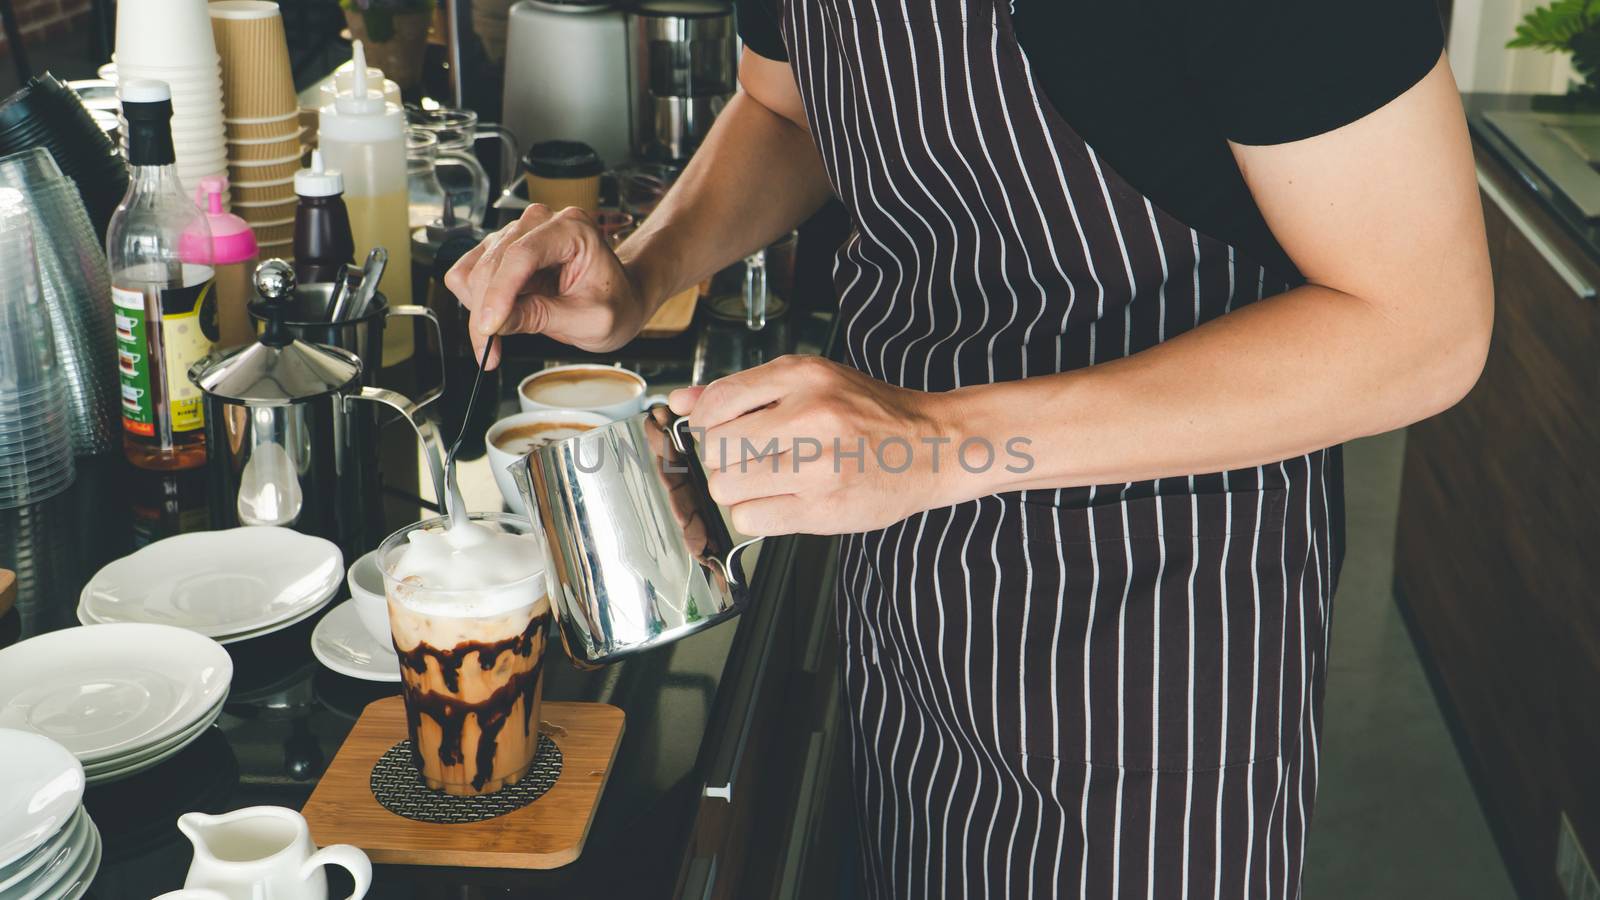 close-up photo of the hand is pouring freshly made cappuccino into a glass. barista Professional men making latte and espresso for customer service.  coffee shop owner is preparing drinks in the cafe.